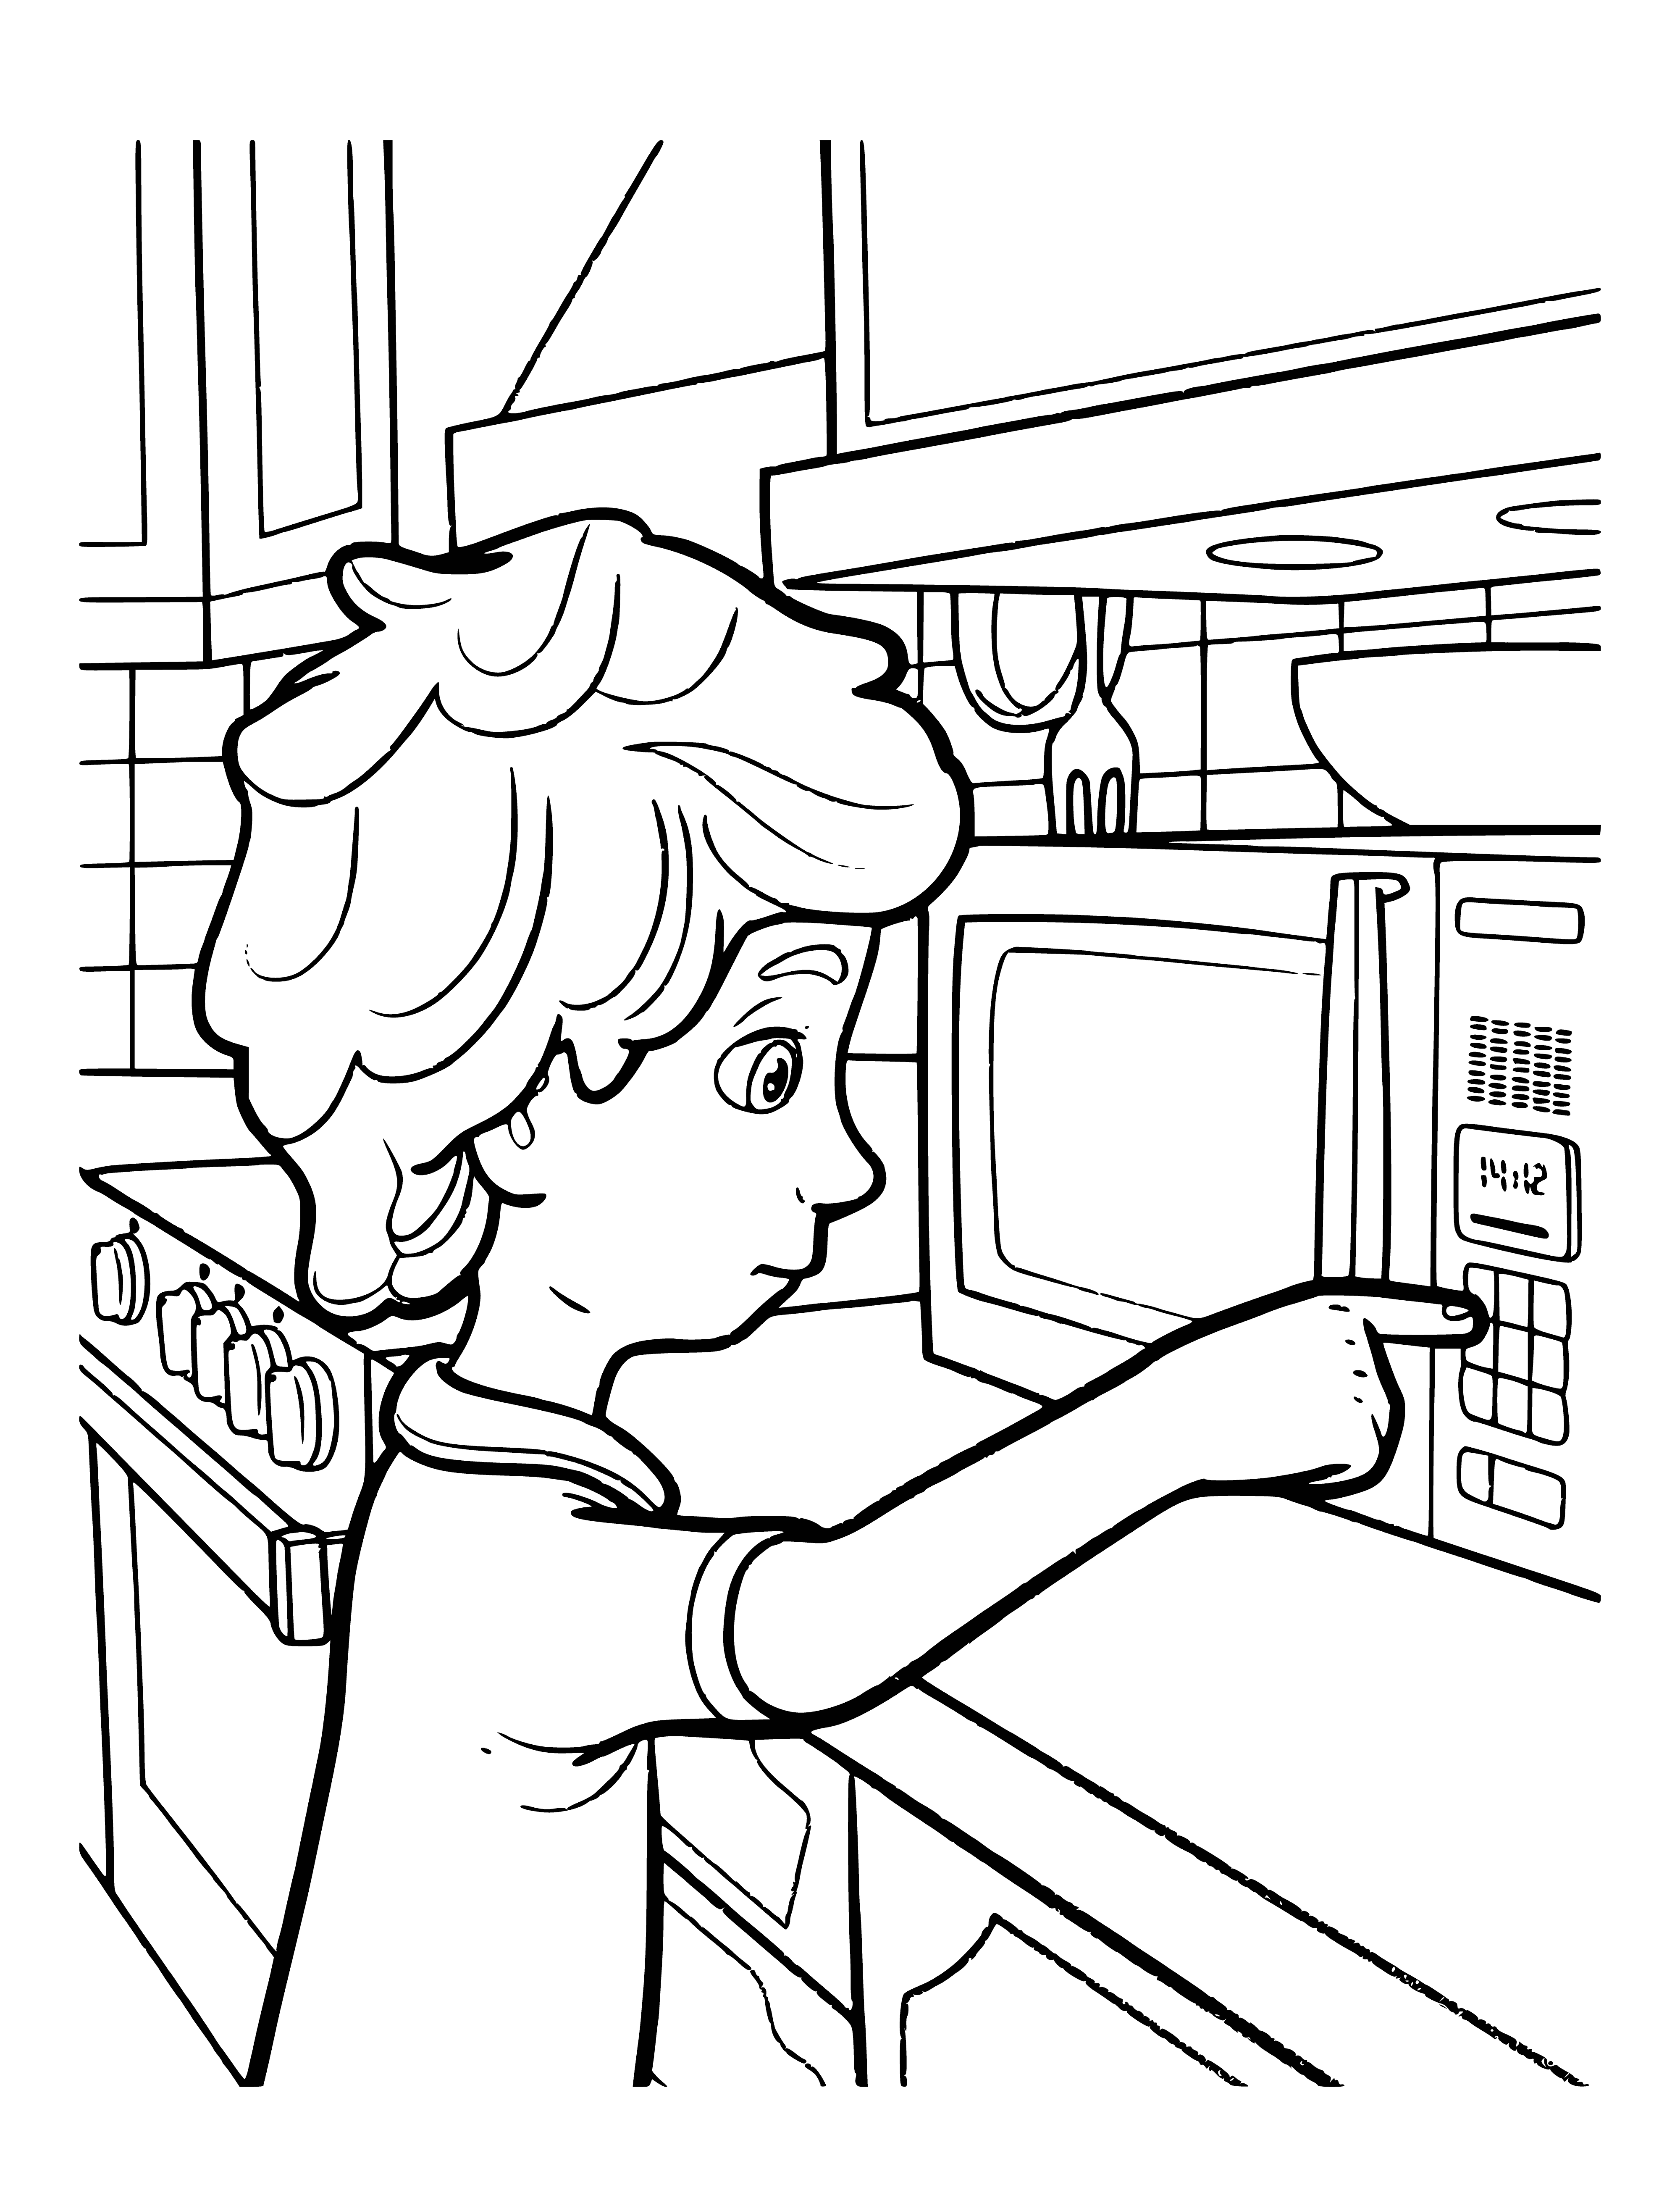 coloring page: Dimych is a fixie fixing a microwave, wearing a blue shirt, red scarf, and blue pants with white stripe. He's standing on a stool.